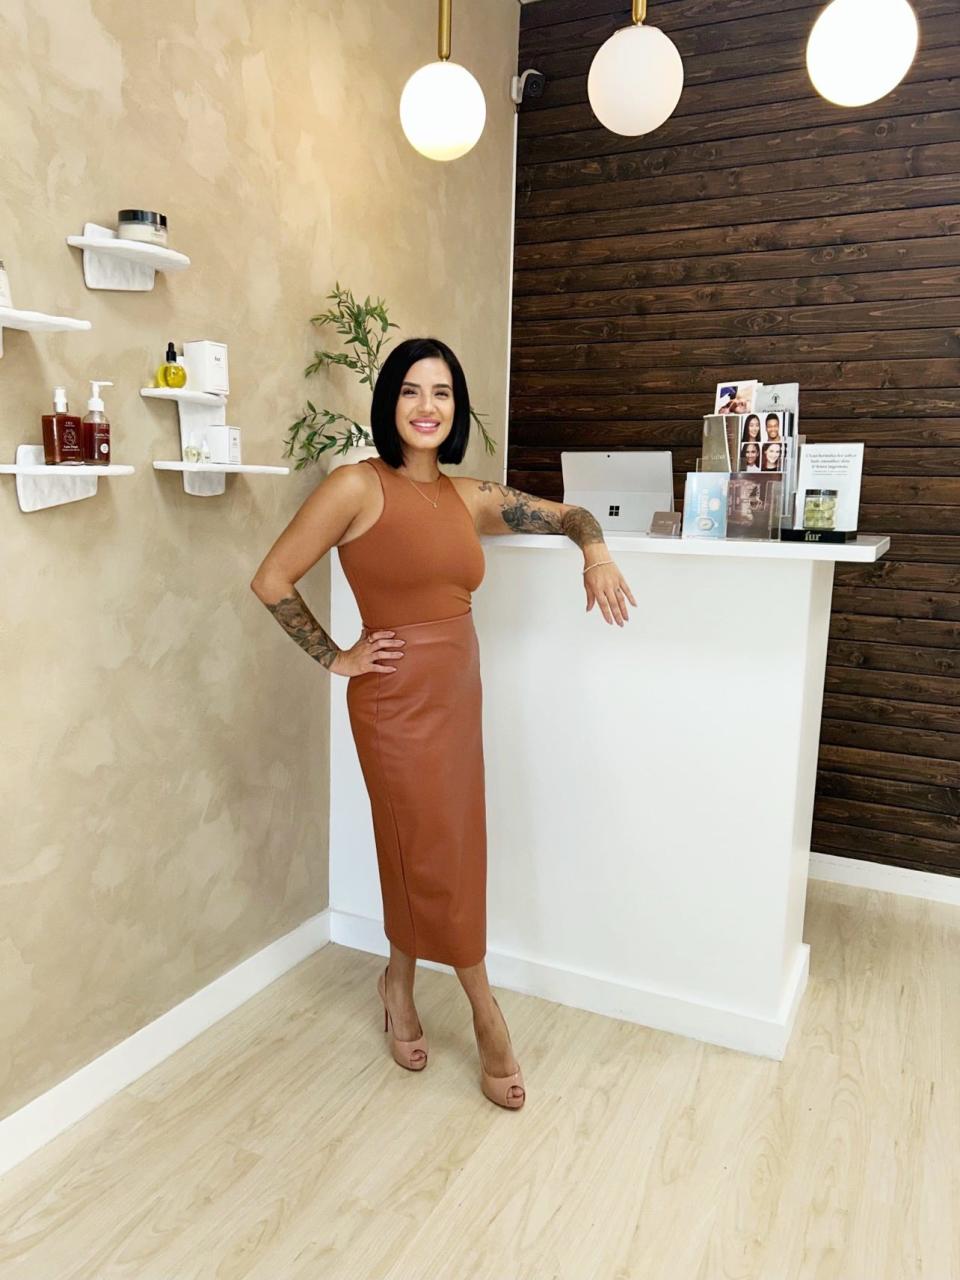 Julissa Sostre a registered nurse and owner of Hadara Aesthetics before taking her next client at 
Lume + Lather Beauty Spa, a luxury spa on 59 Pleasant St Suite C, Randolph, MA 02368.  Sostre changed her career path from working in the hospital to aesthetic nursing, specializing in  Botox, derma fillers, Iv vitamins, shots, lip injections, cheek and
Jaw fillers. August 8, 2023.